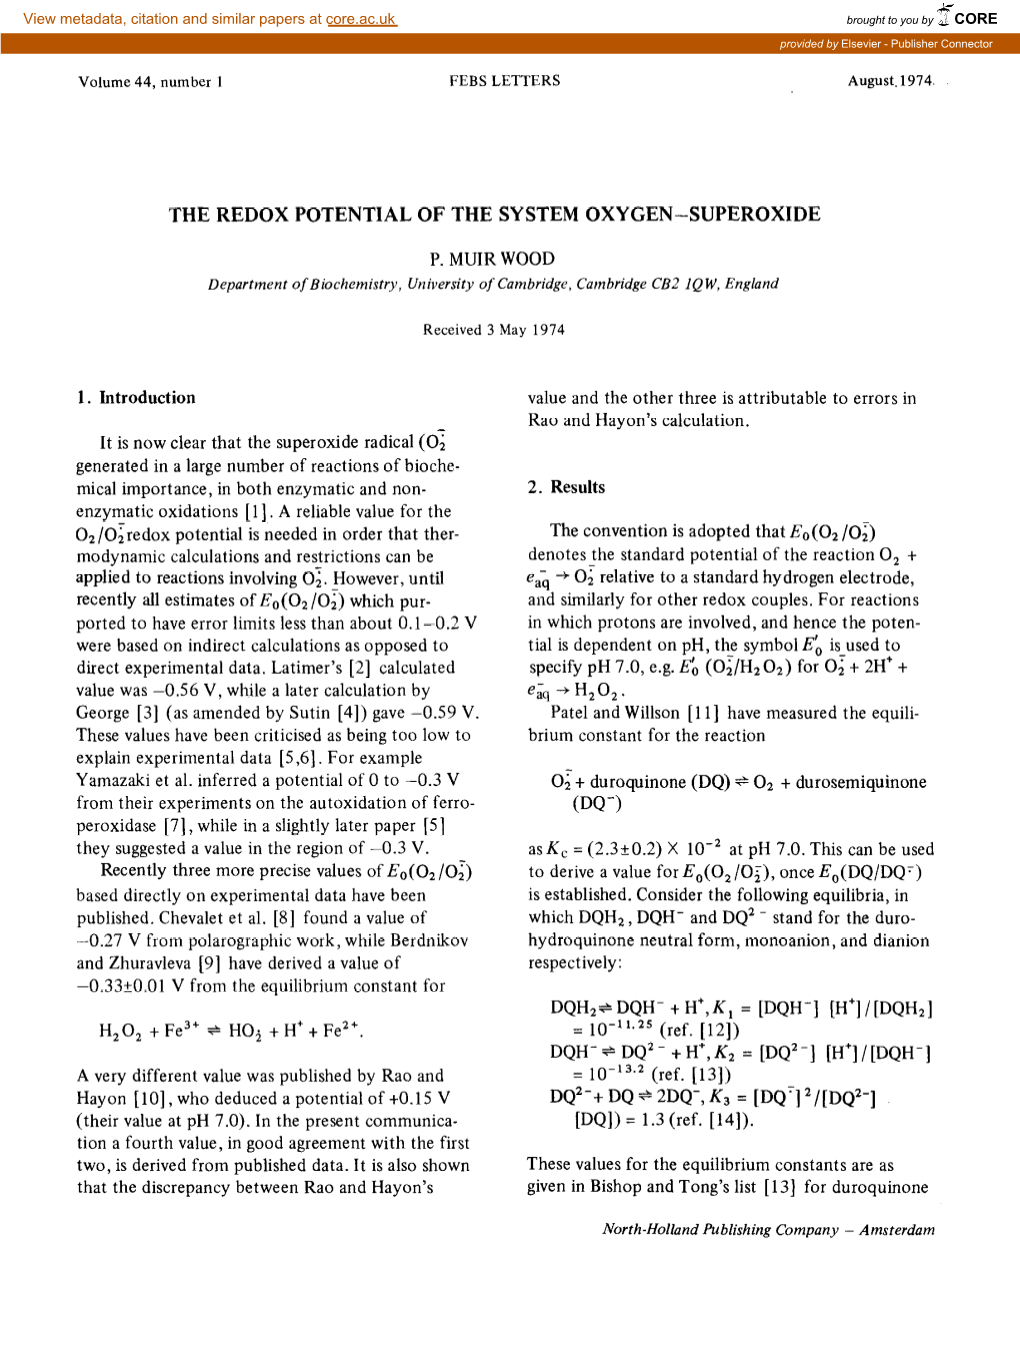 THE REDOX POTENTIAL of the SYSTEM OXYGEN-SUPEROXIDE P. MUIR WOOD 1. Introduction It Is Now Clear That the Superoxide Radical